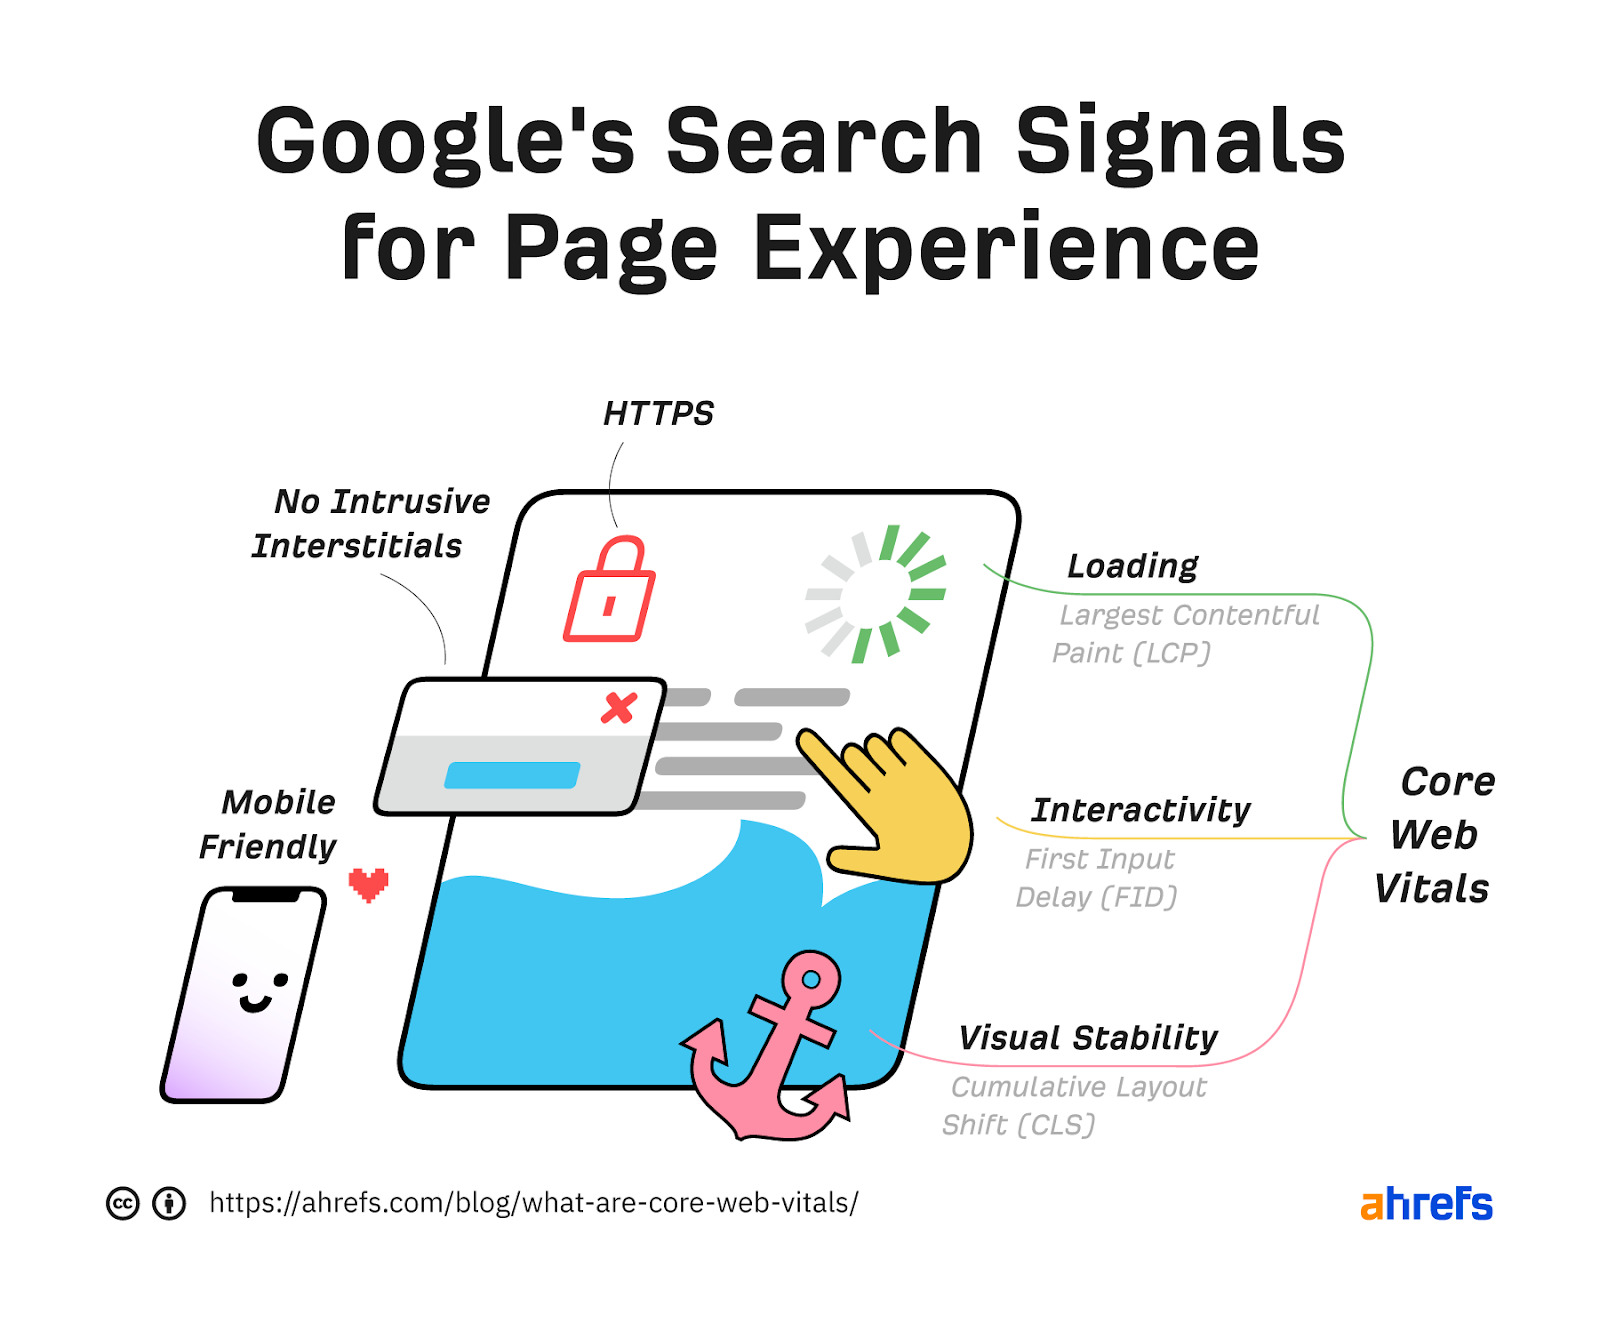 Google's Page Experience signals include https, no intrusive interstitials, mobile-friendliness, and core web vitals